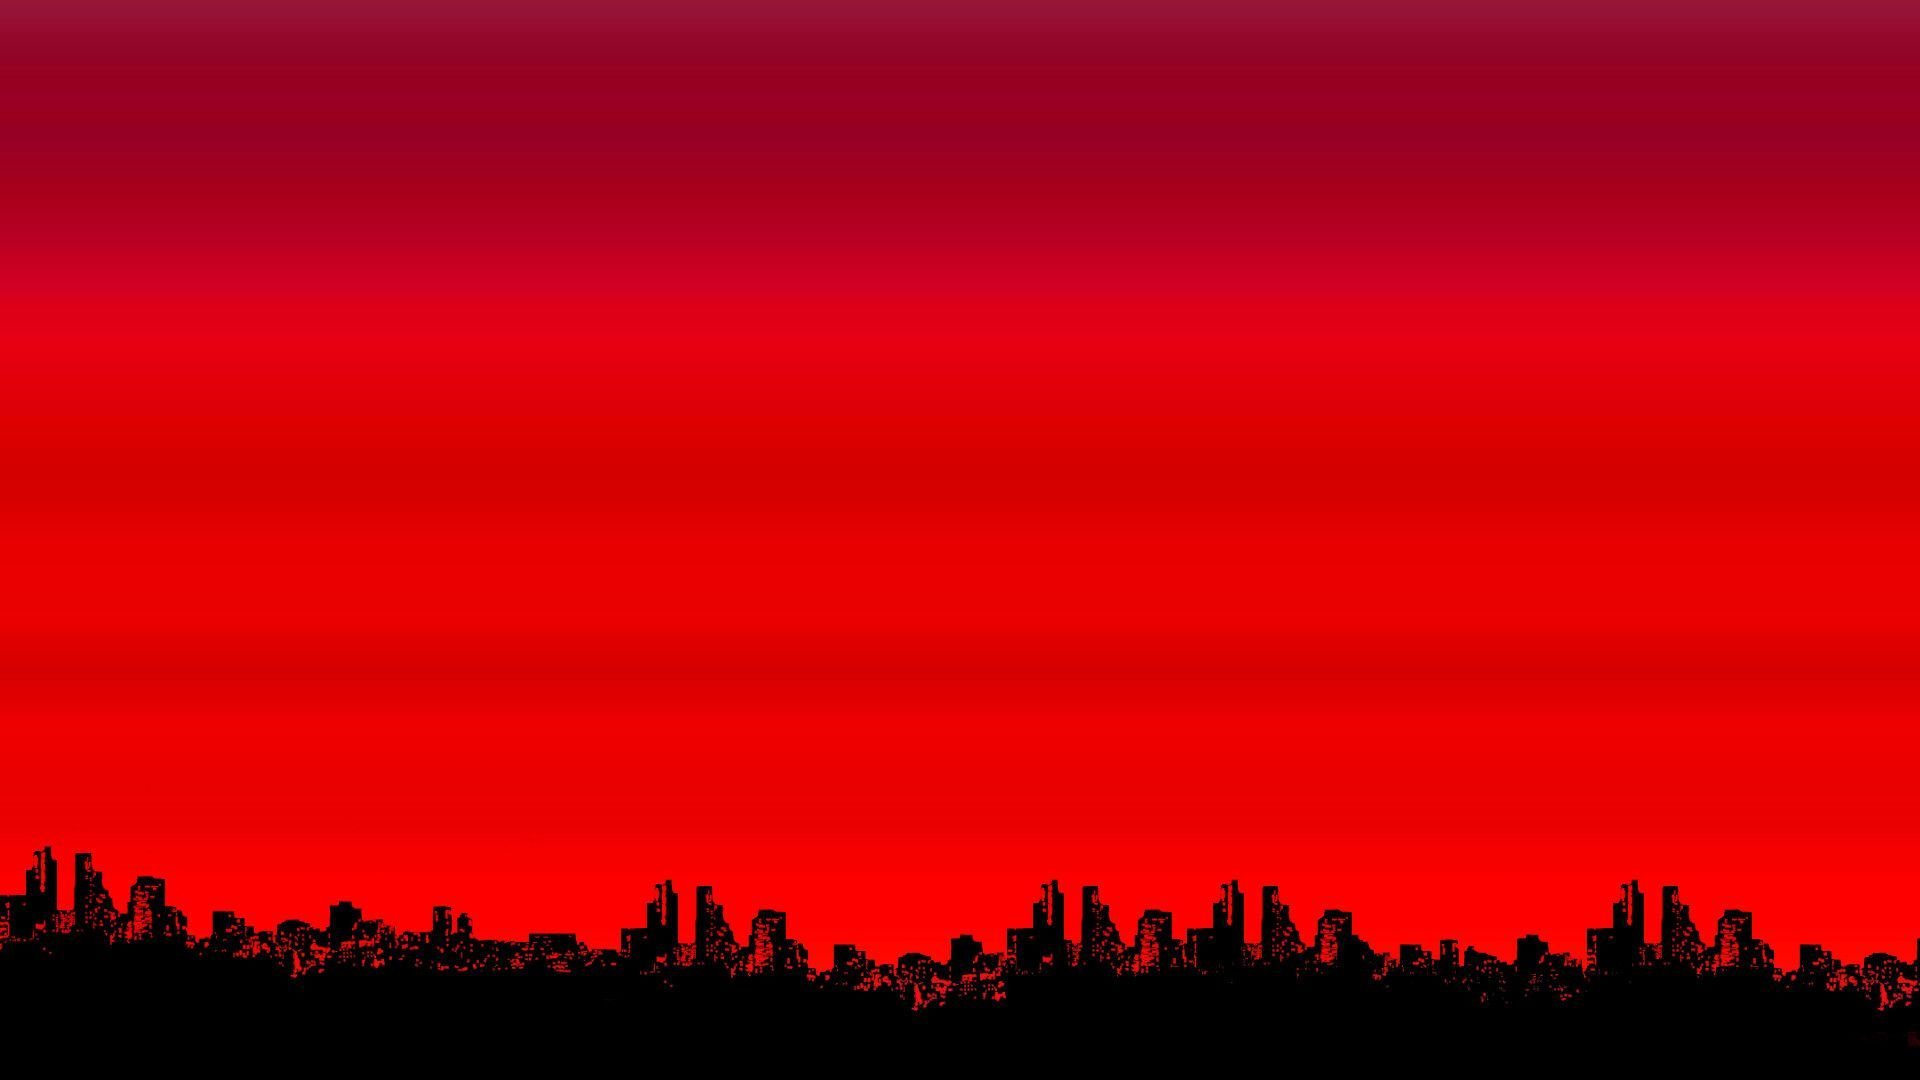 Red and Black Aesthetic Computer Wallpapers 